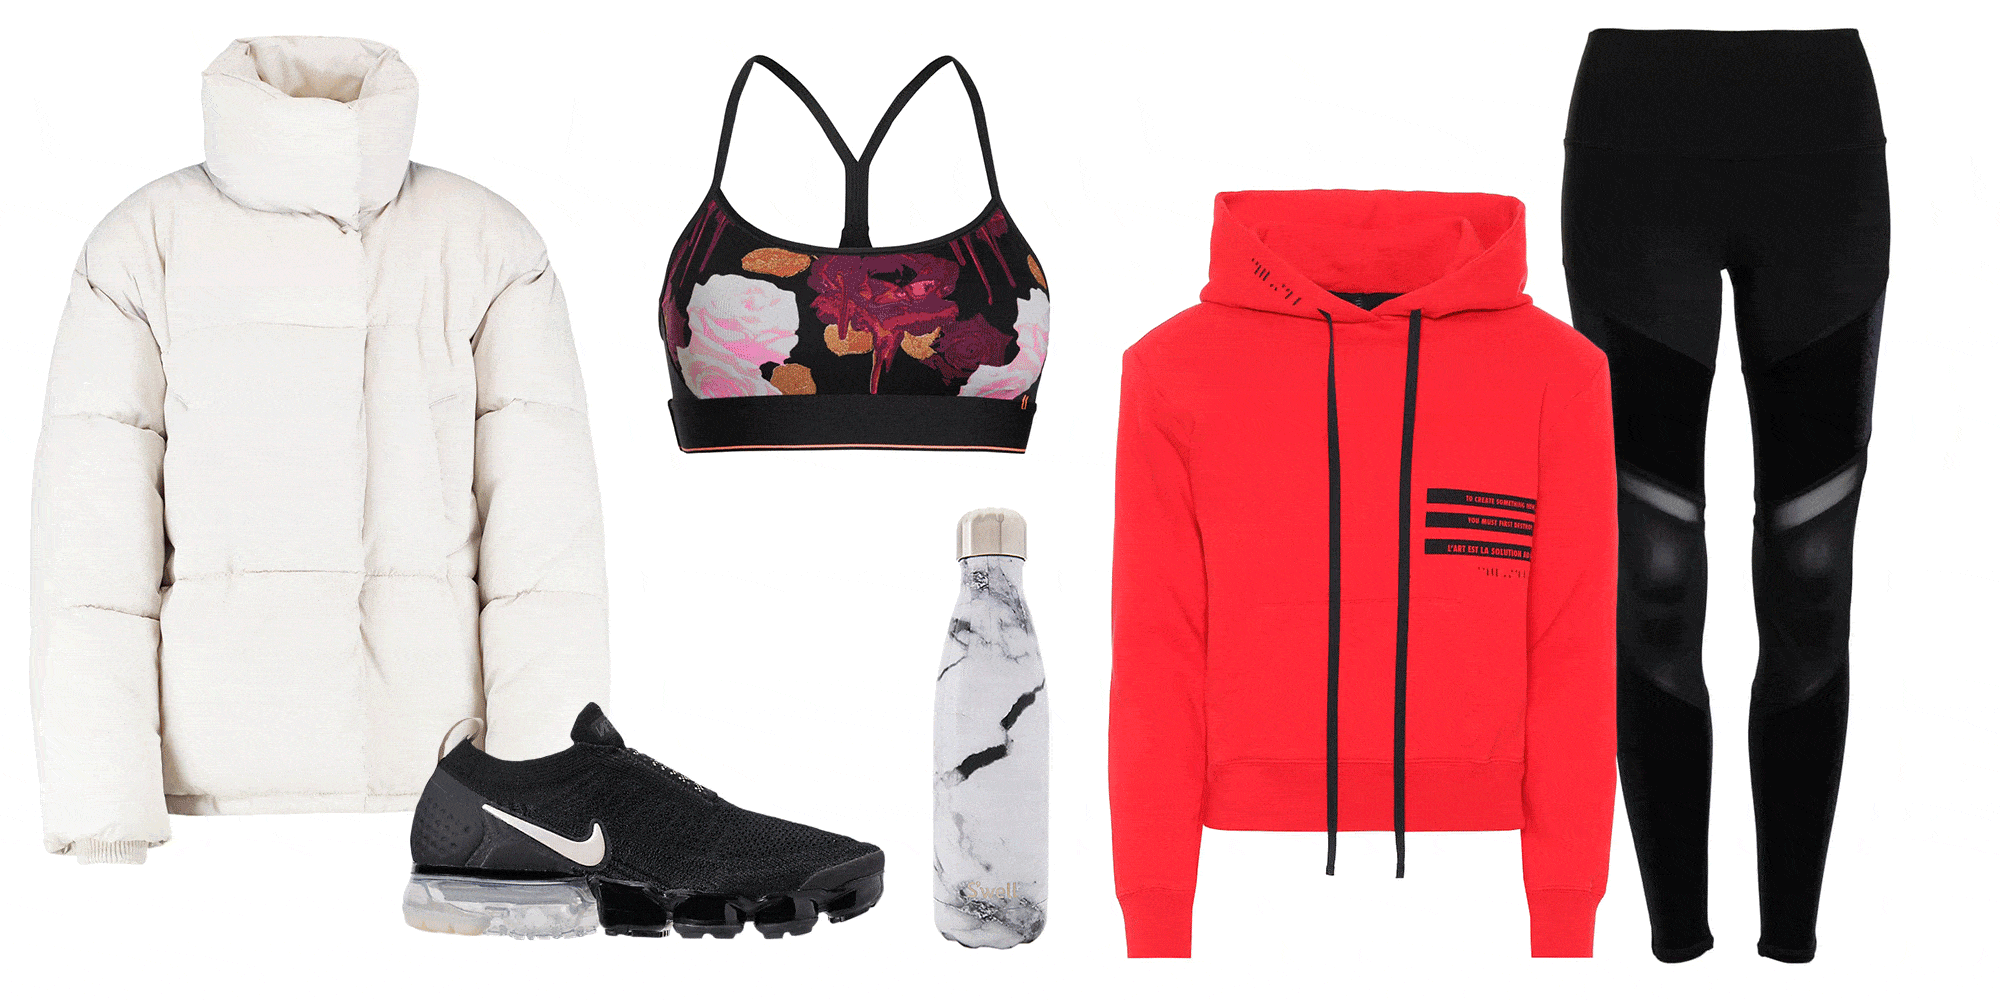 nike vapormax outfit ideas